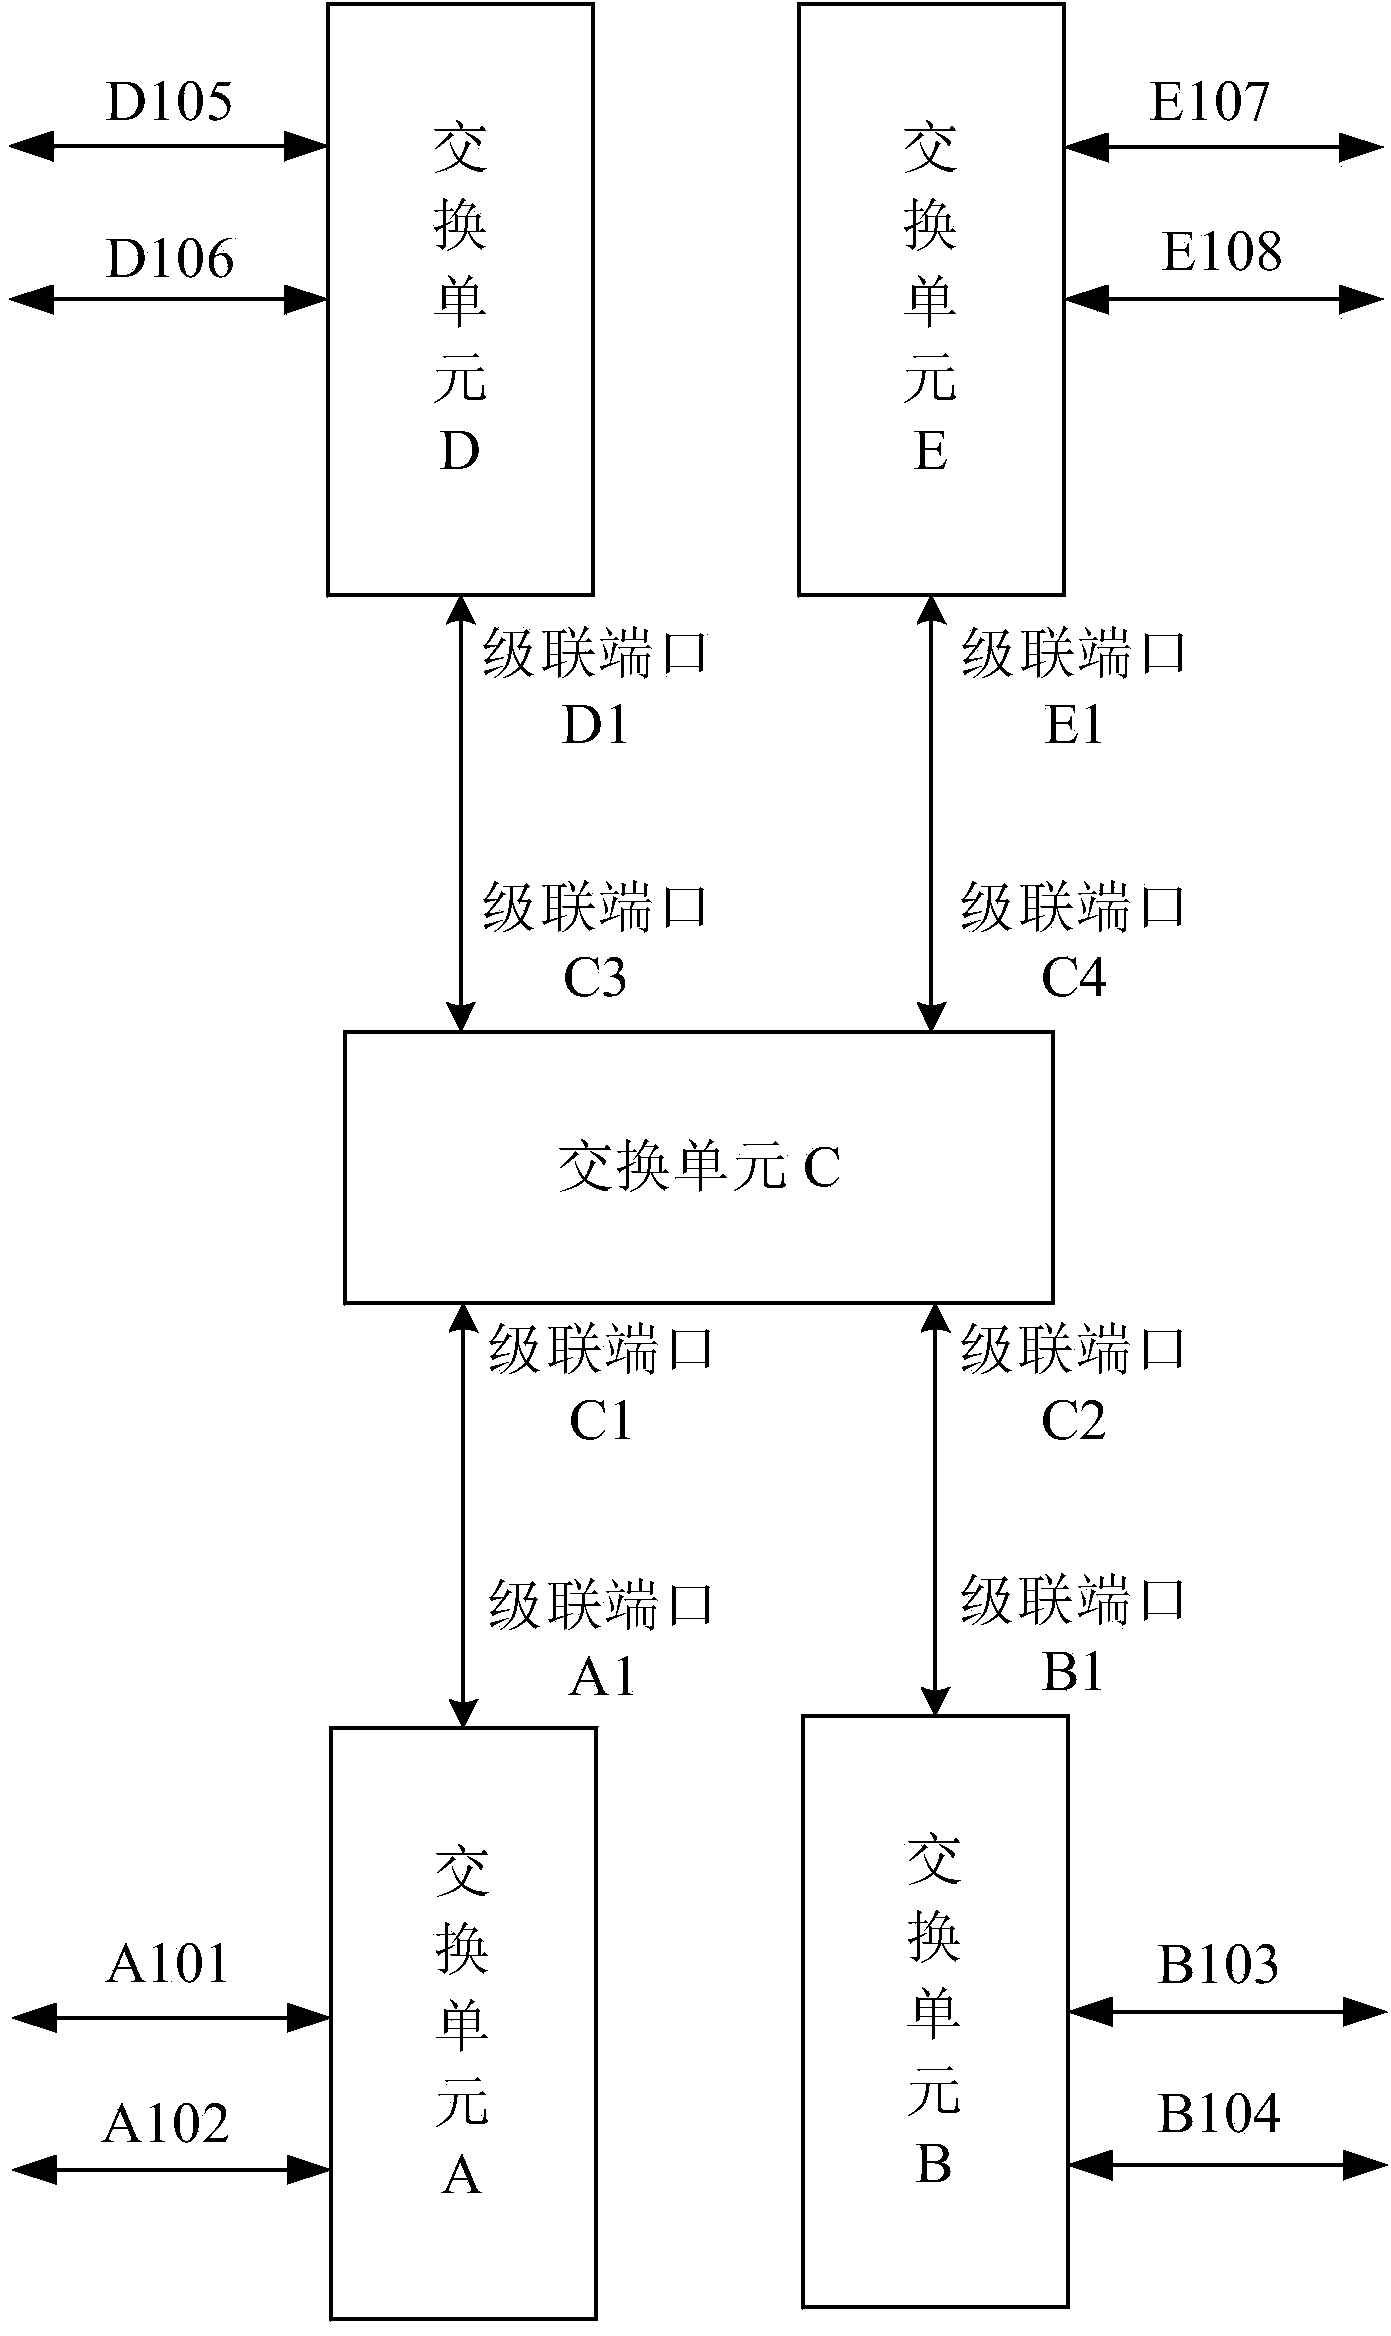 Method and device for data forwarding